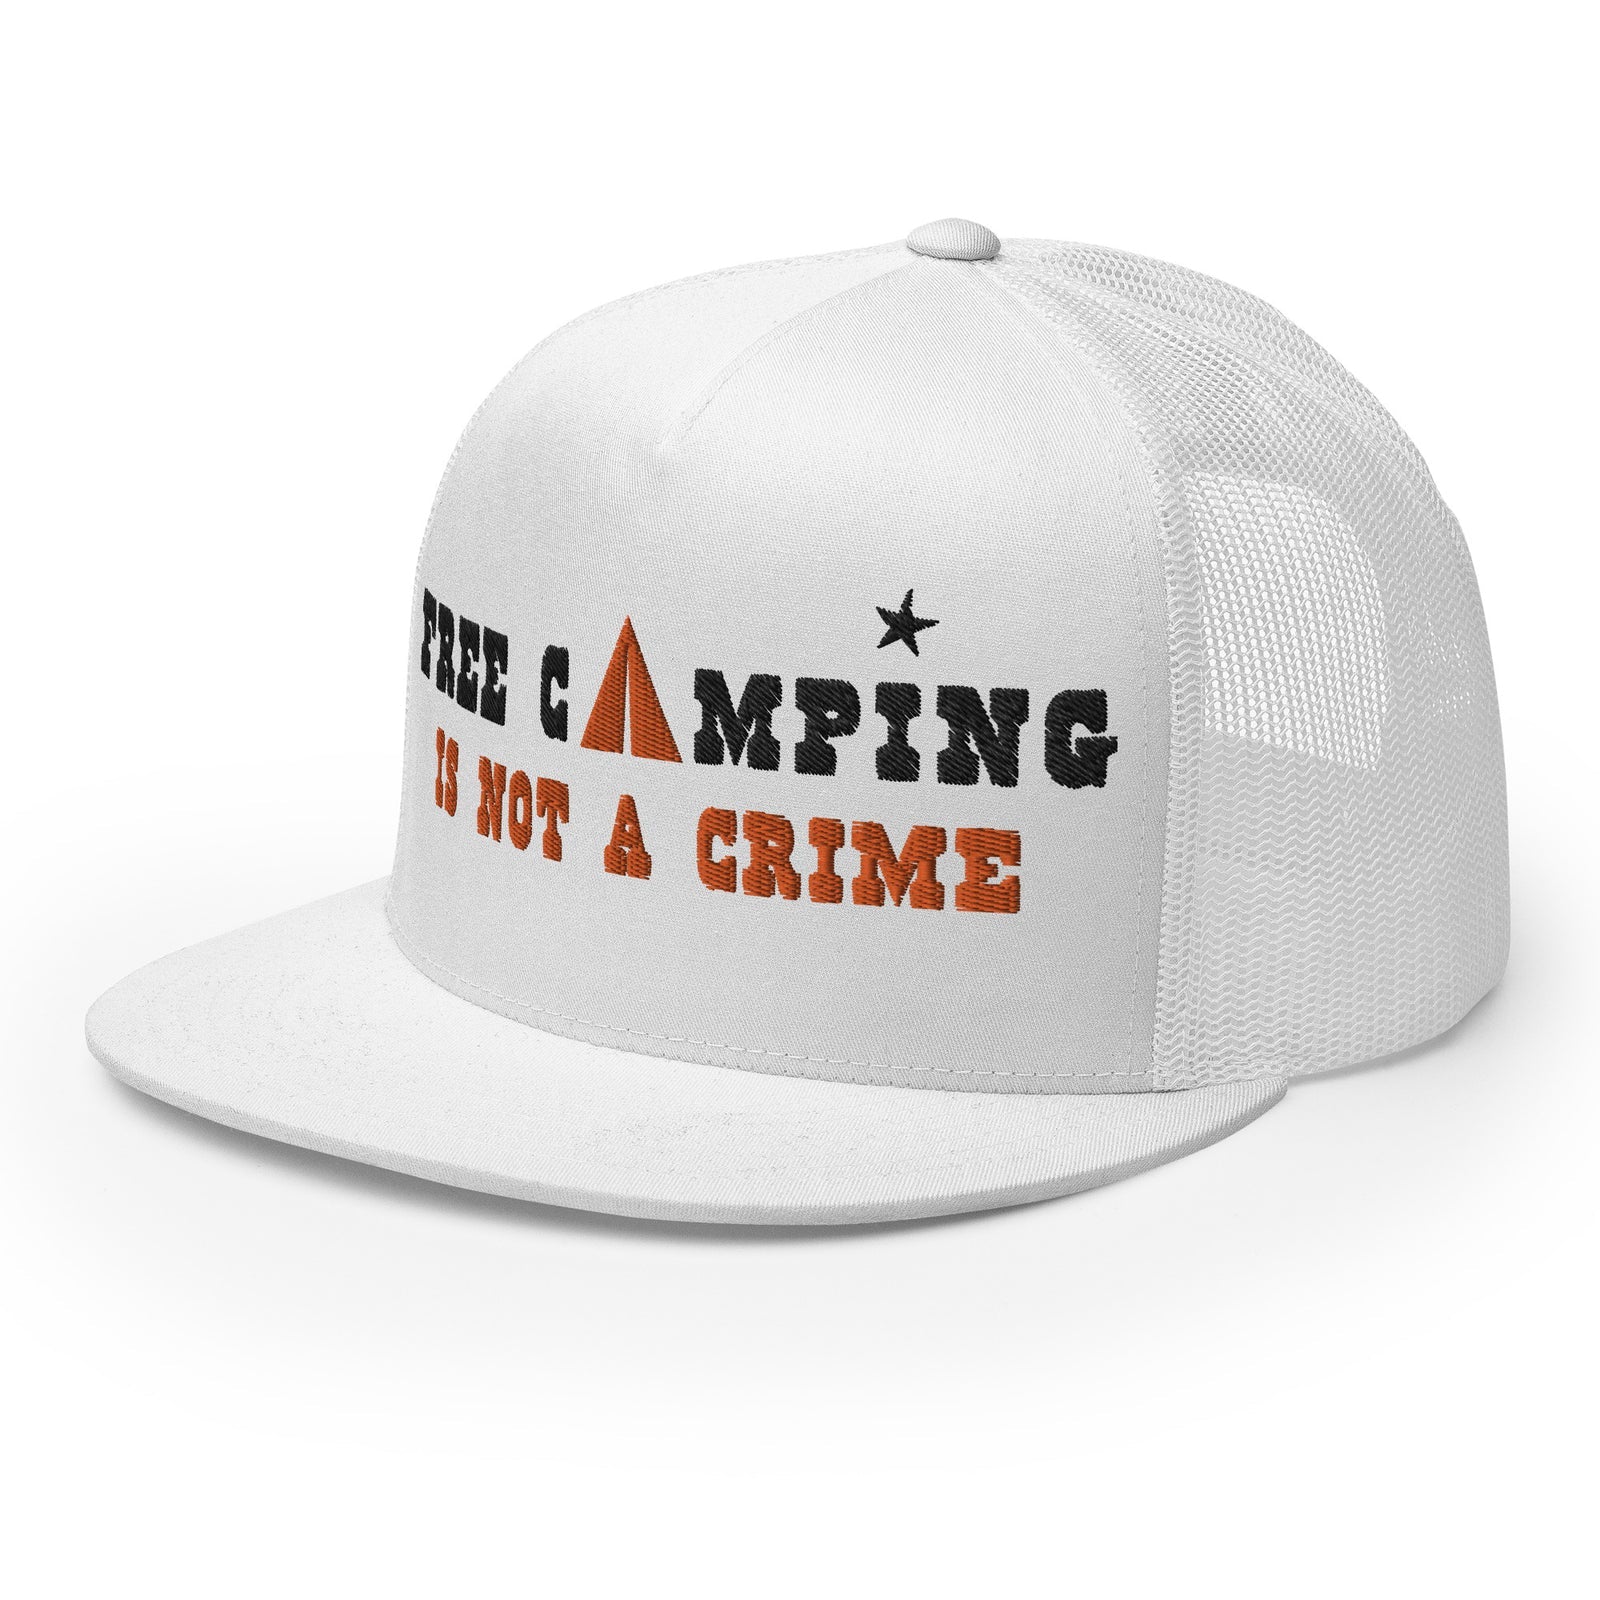 Casquettes Free Camping is not a crime